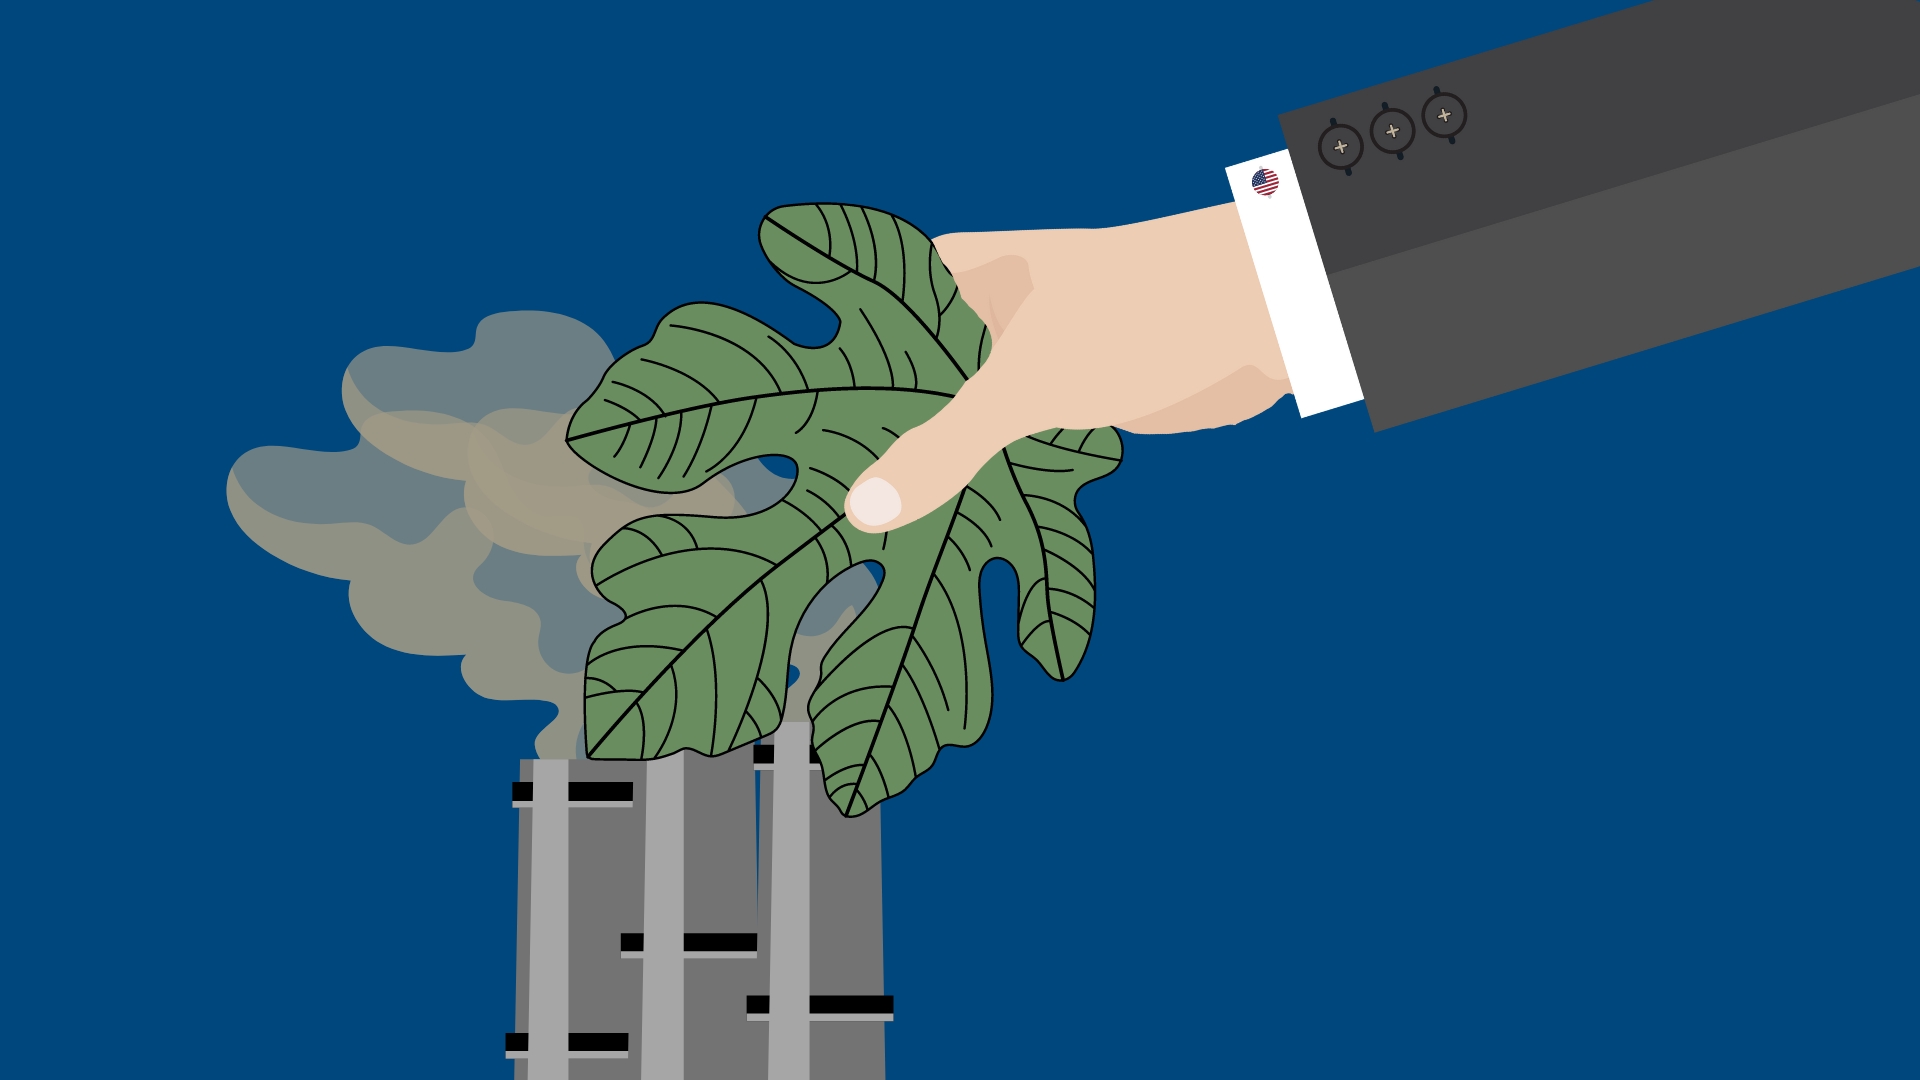 A hand with an American flag cuff link holds a fig leaf over the pollution from a smokestack